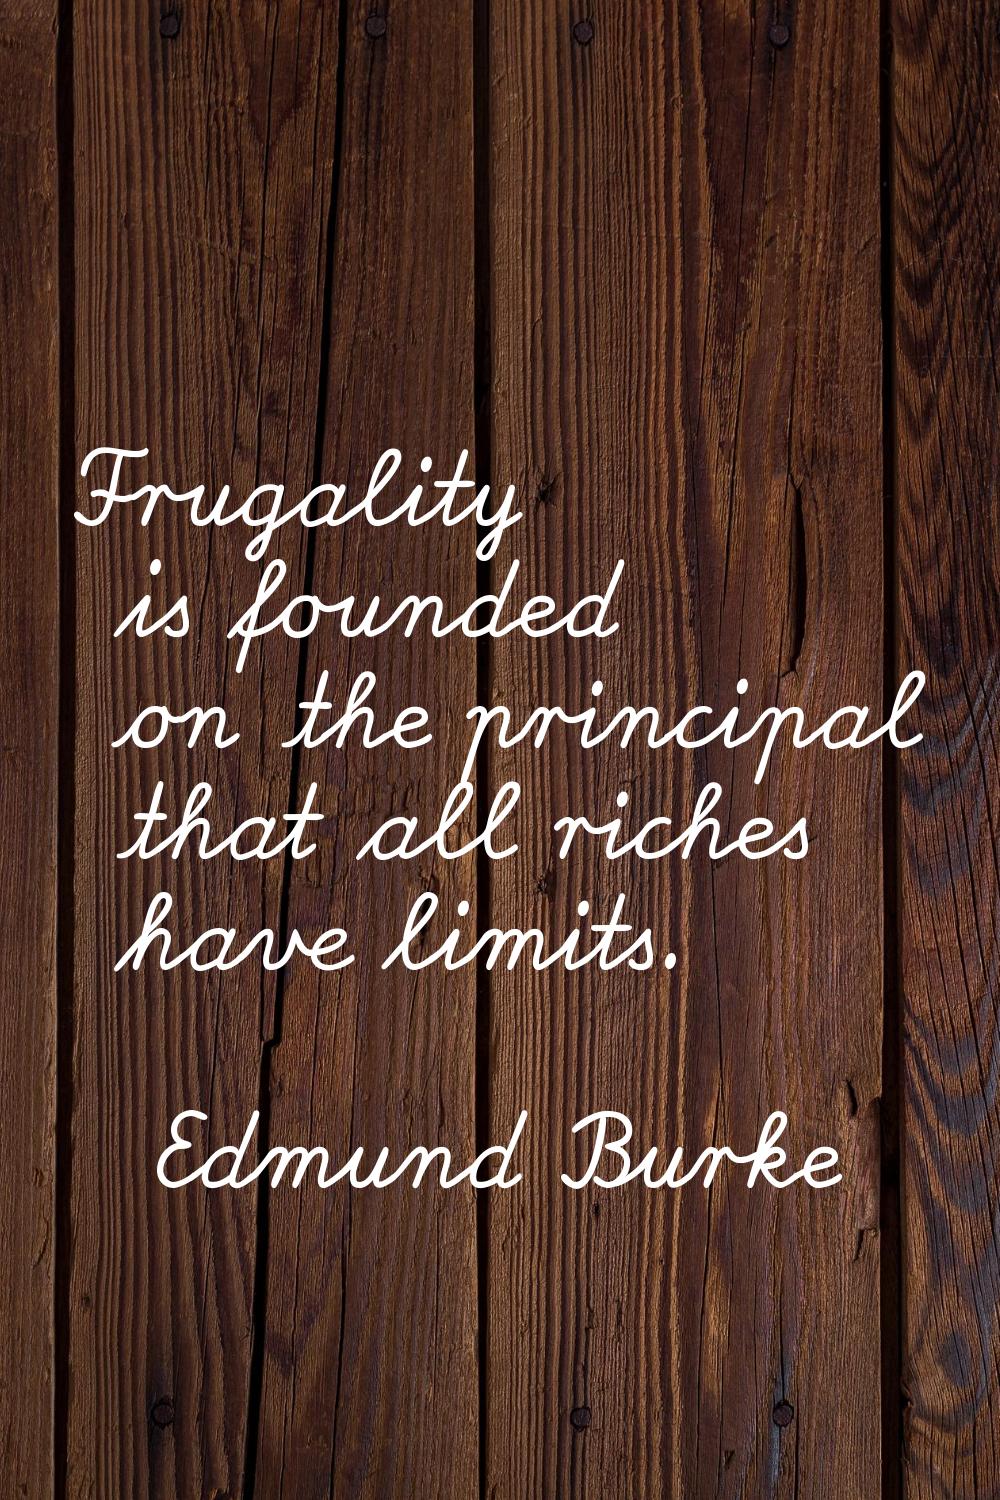 Frugality is founded on the principal that all riches have limits.